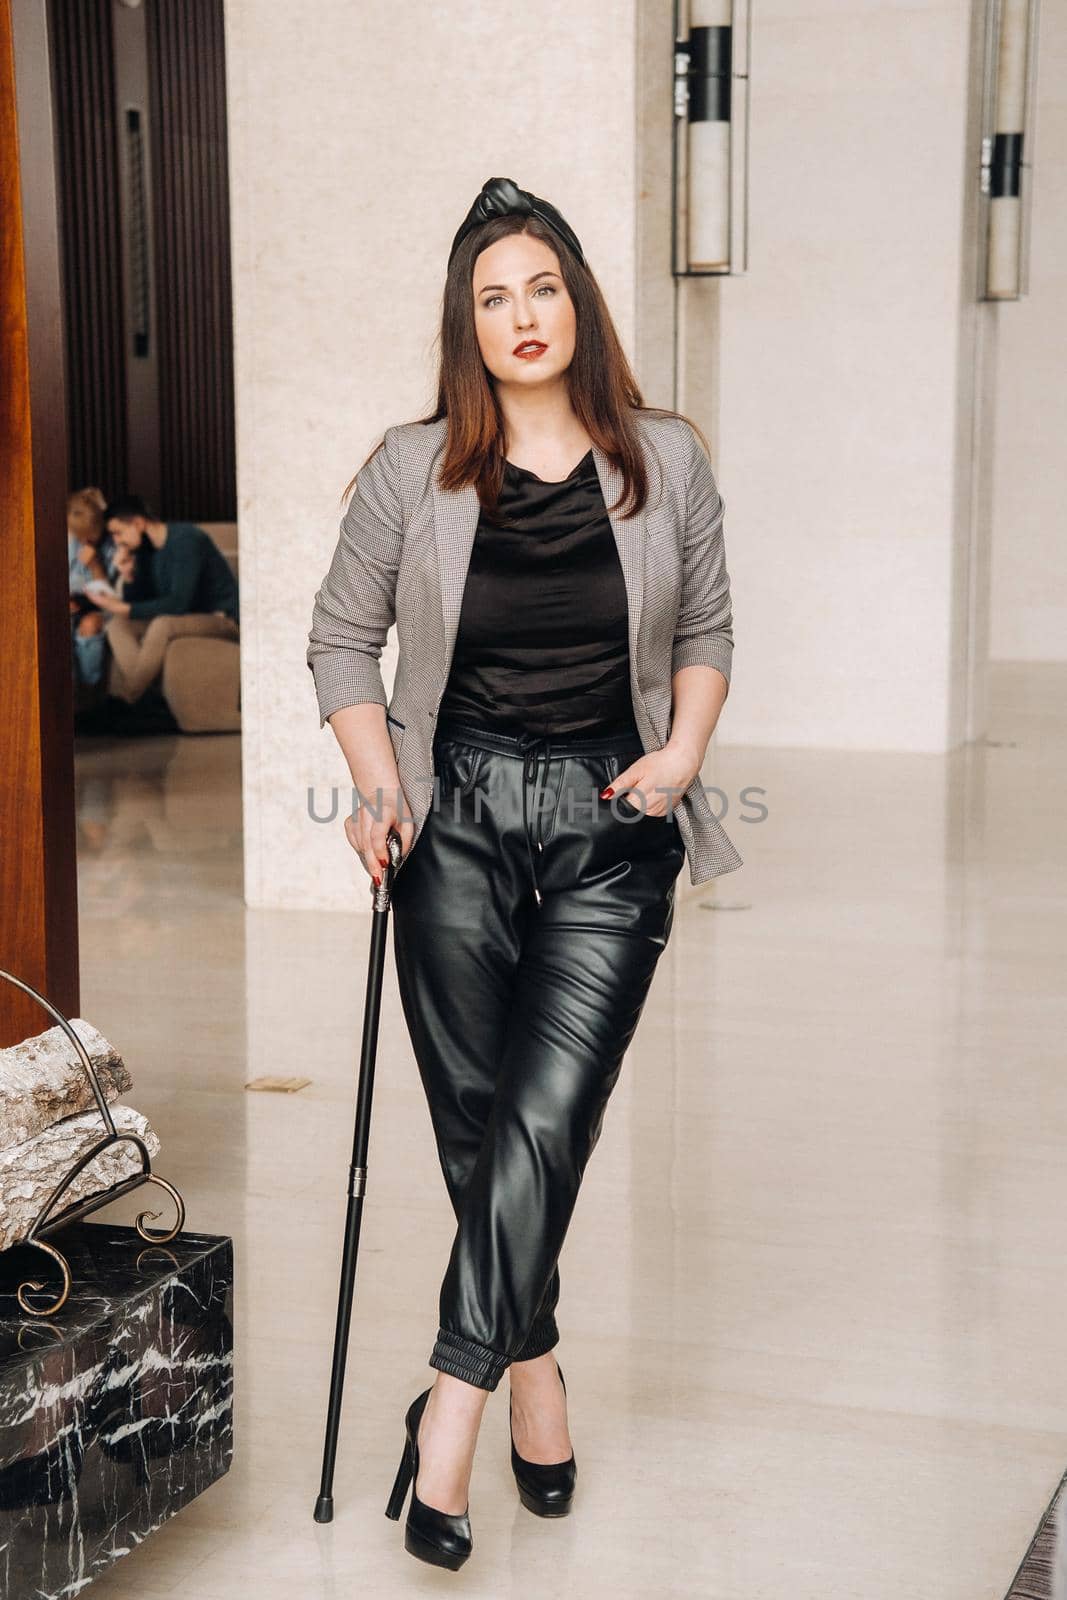 A girl in black trousers and a jacket with a cane in the interior.